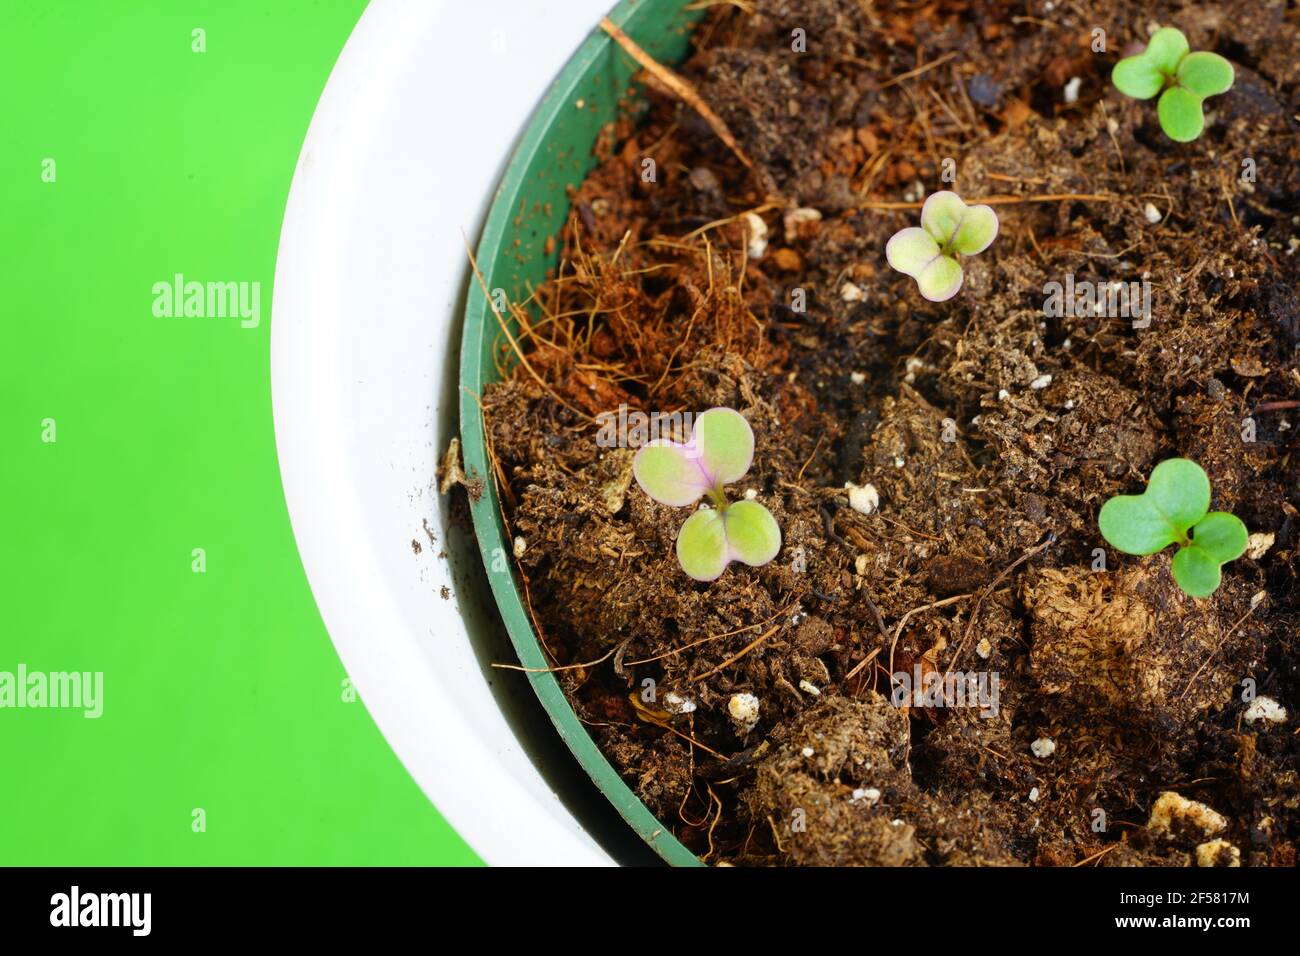 Growing kale seeds in soil in a pot Stock Photo - Alamy